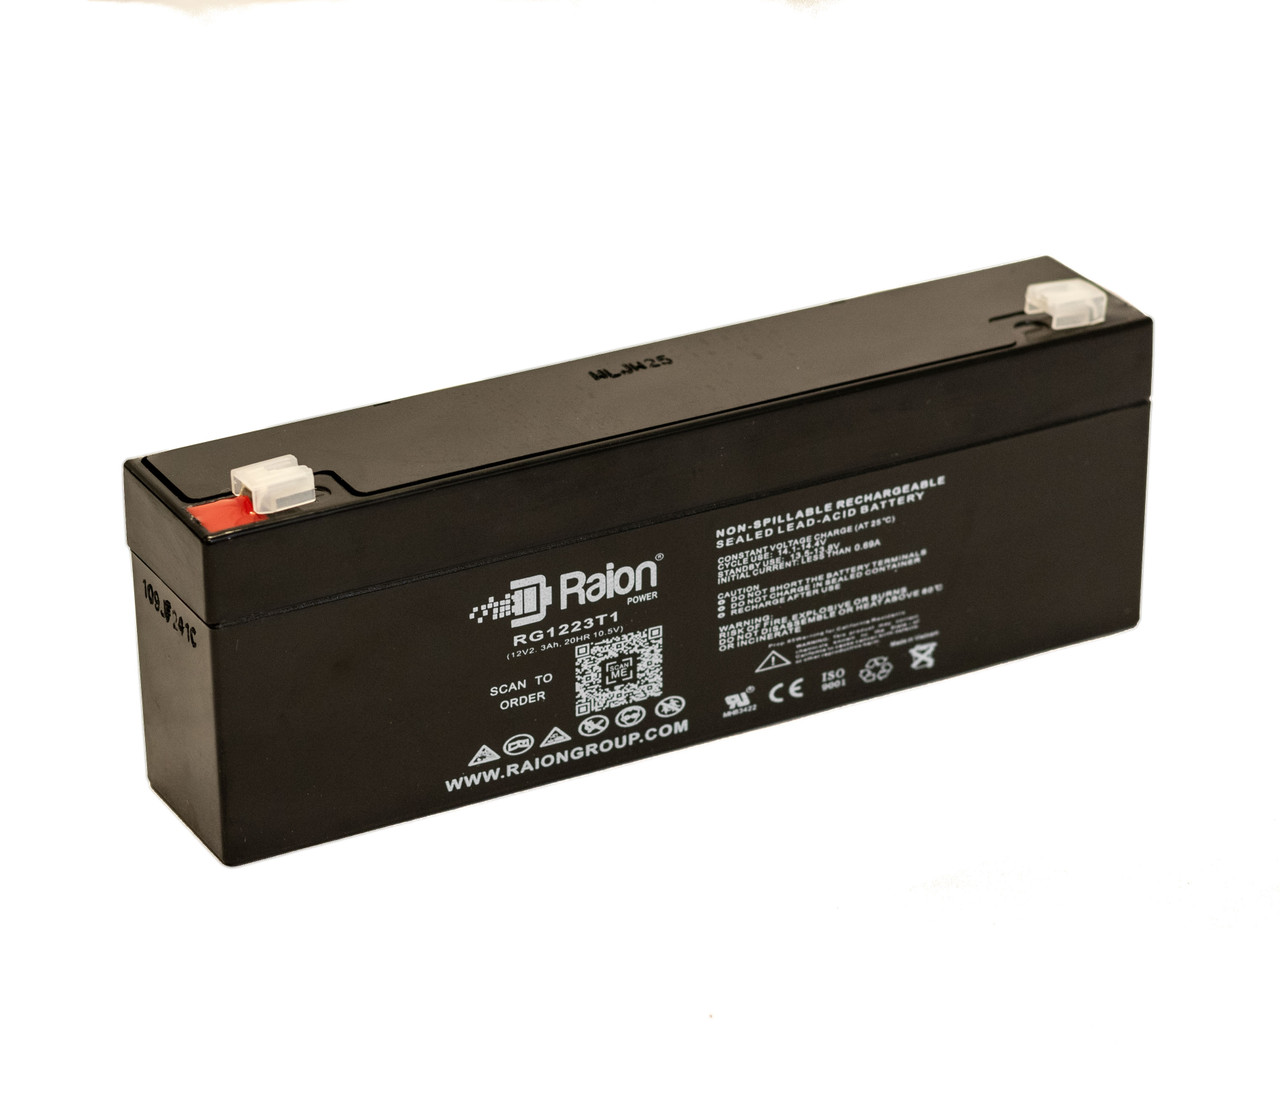 Raion Power RG1223T1 Replacement Battery for Narco Air Shields N10 Warm Weigh Infant Scale